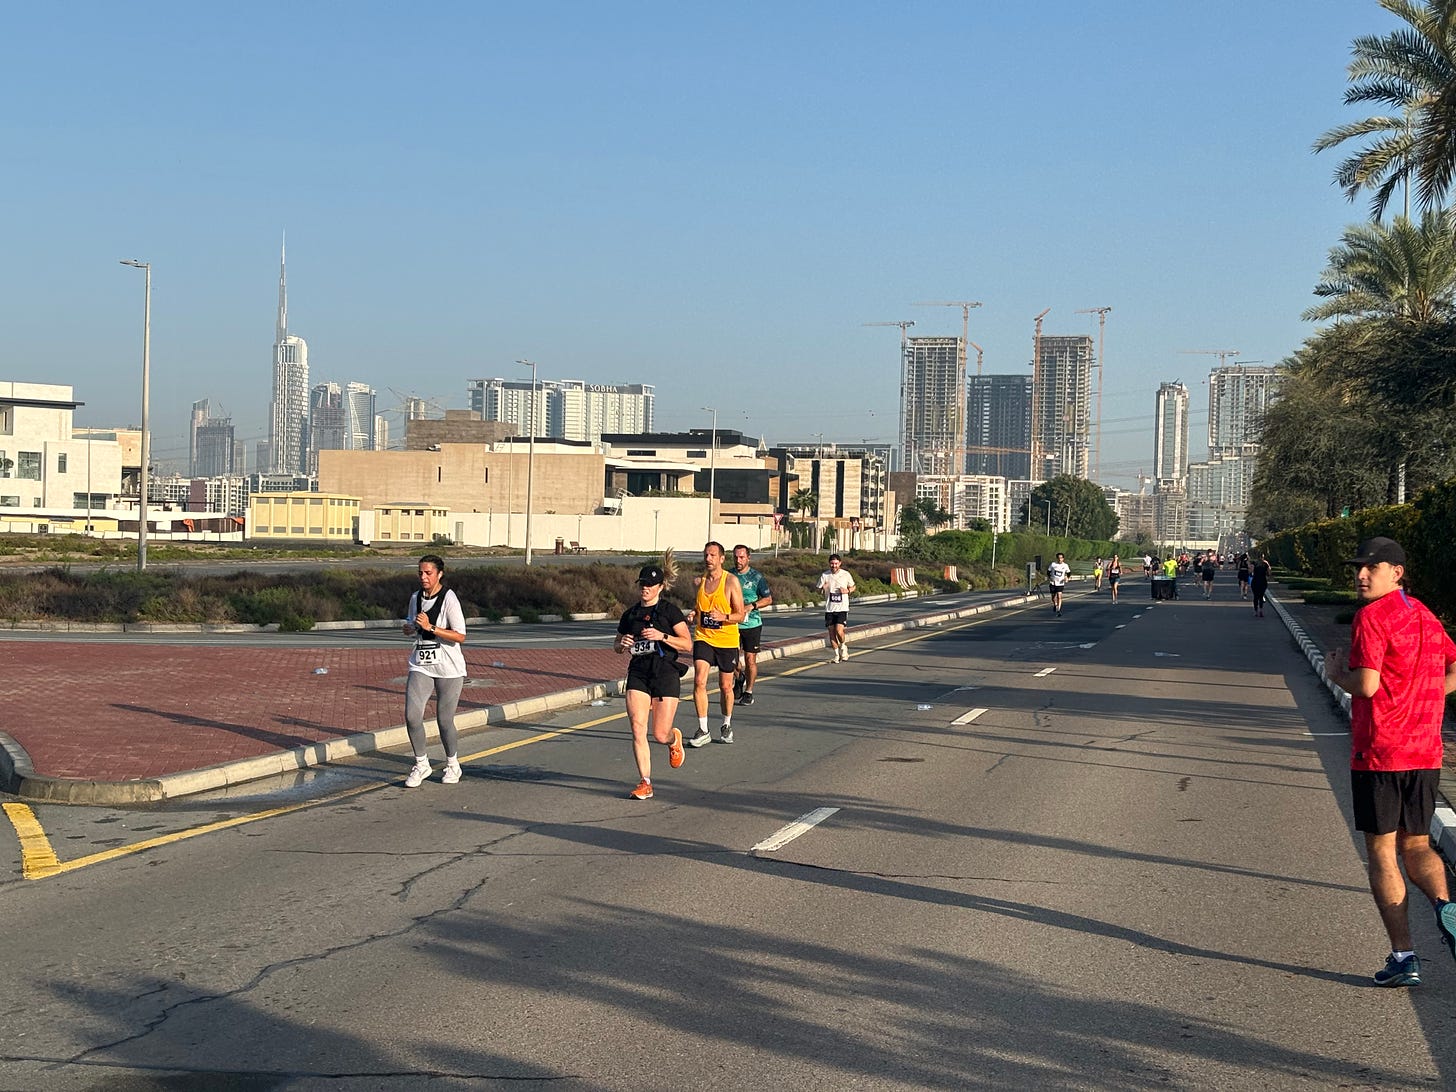 Runners on the Skechers Performance Run in Dubai with the world’s tallest building, the Burj Khalifa, visible in the background